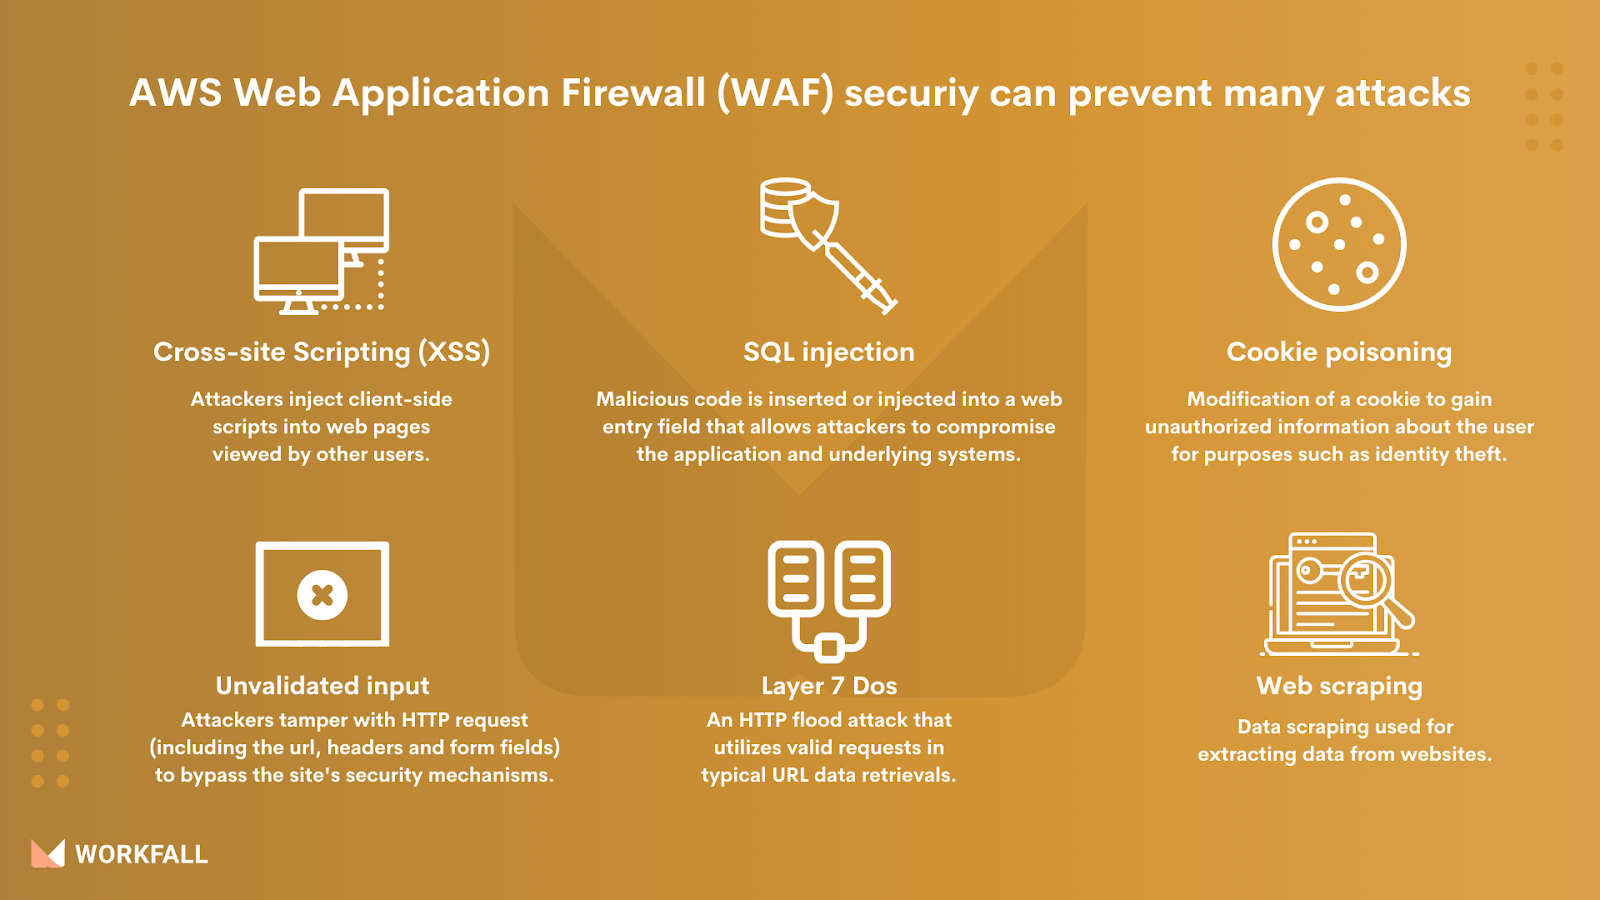 Attacks that WAF prevents